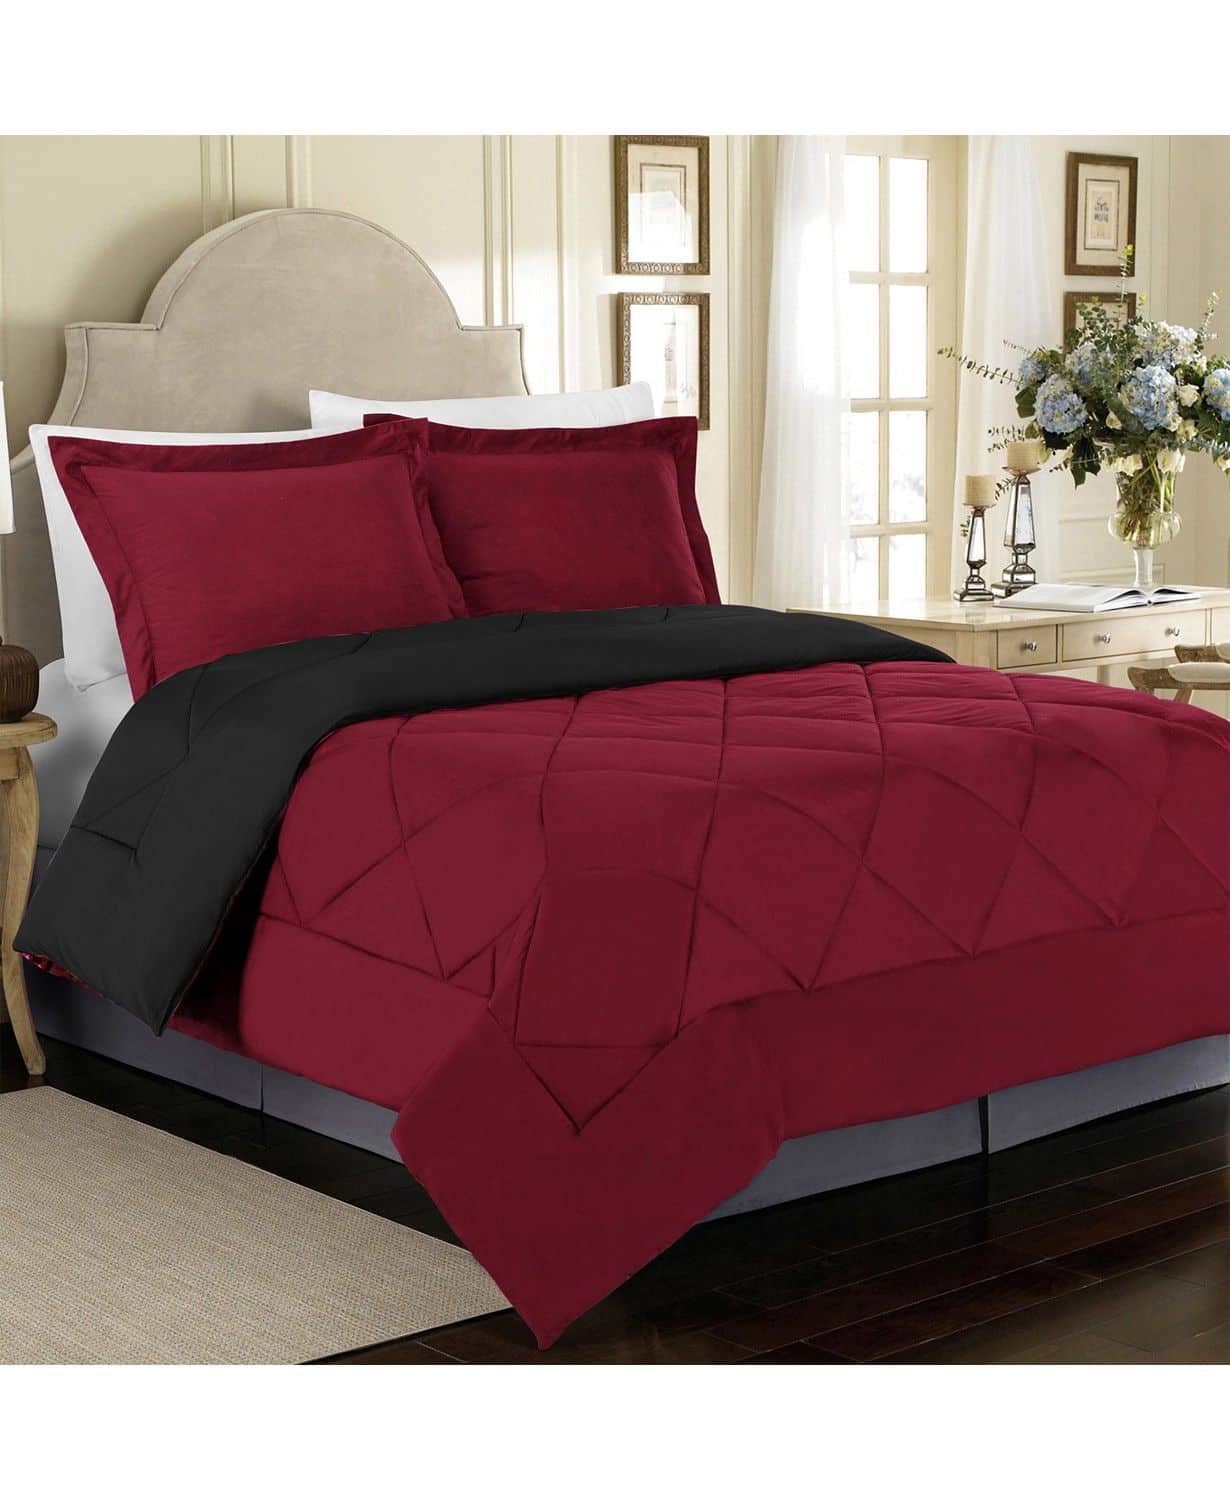 Cathay Home Inc. All Season Peach Skin Reversible Full/Queen Bedding Comforter Set -$65.99(50% Off)